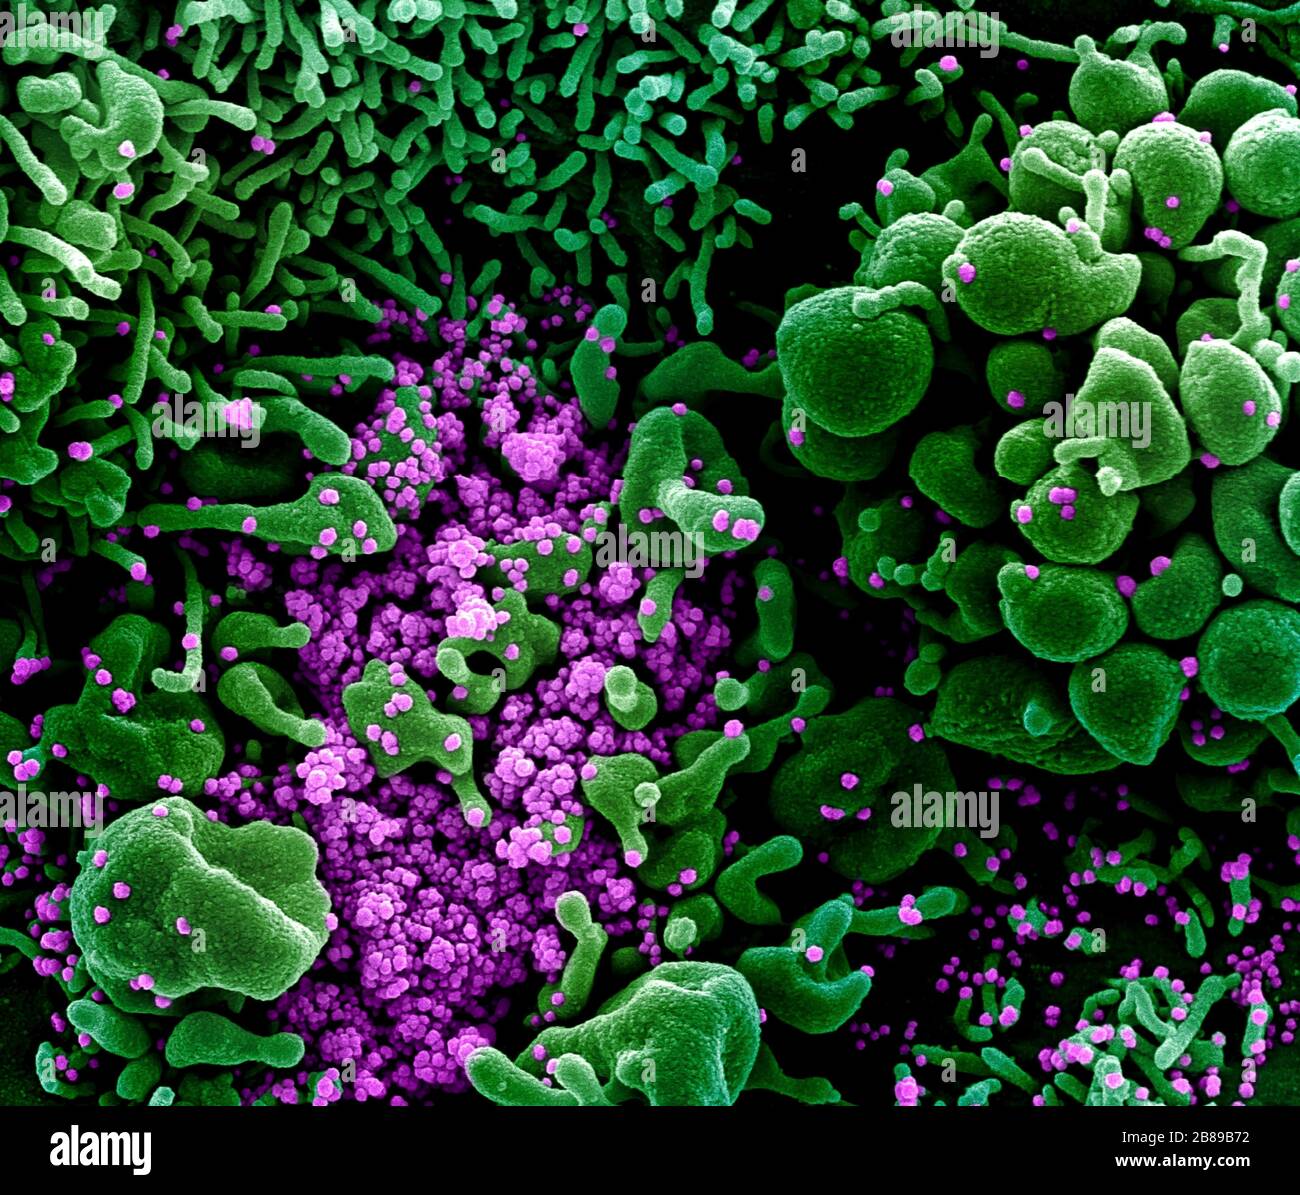 A transmission electron micrograph of COVID-19, novel coronavirus, an apoptotic cell heavily infected with SARS-COV-2 virus particles, isolated from a patient sample at the NIAID Integrated Research Facility March 11, 2020 in Fort Detrick, Maryland. Stock Photo